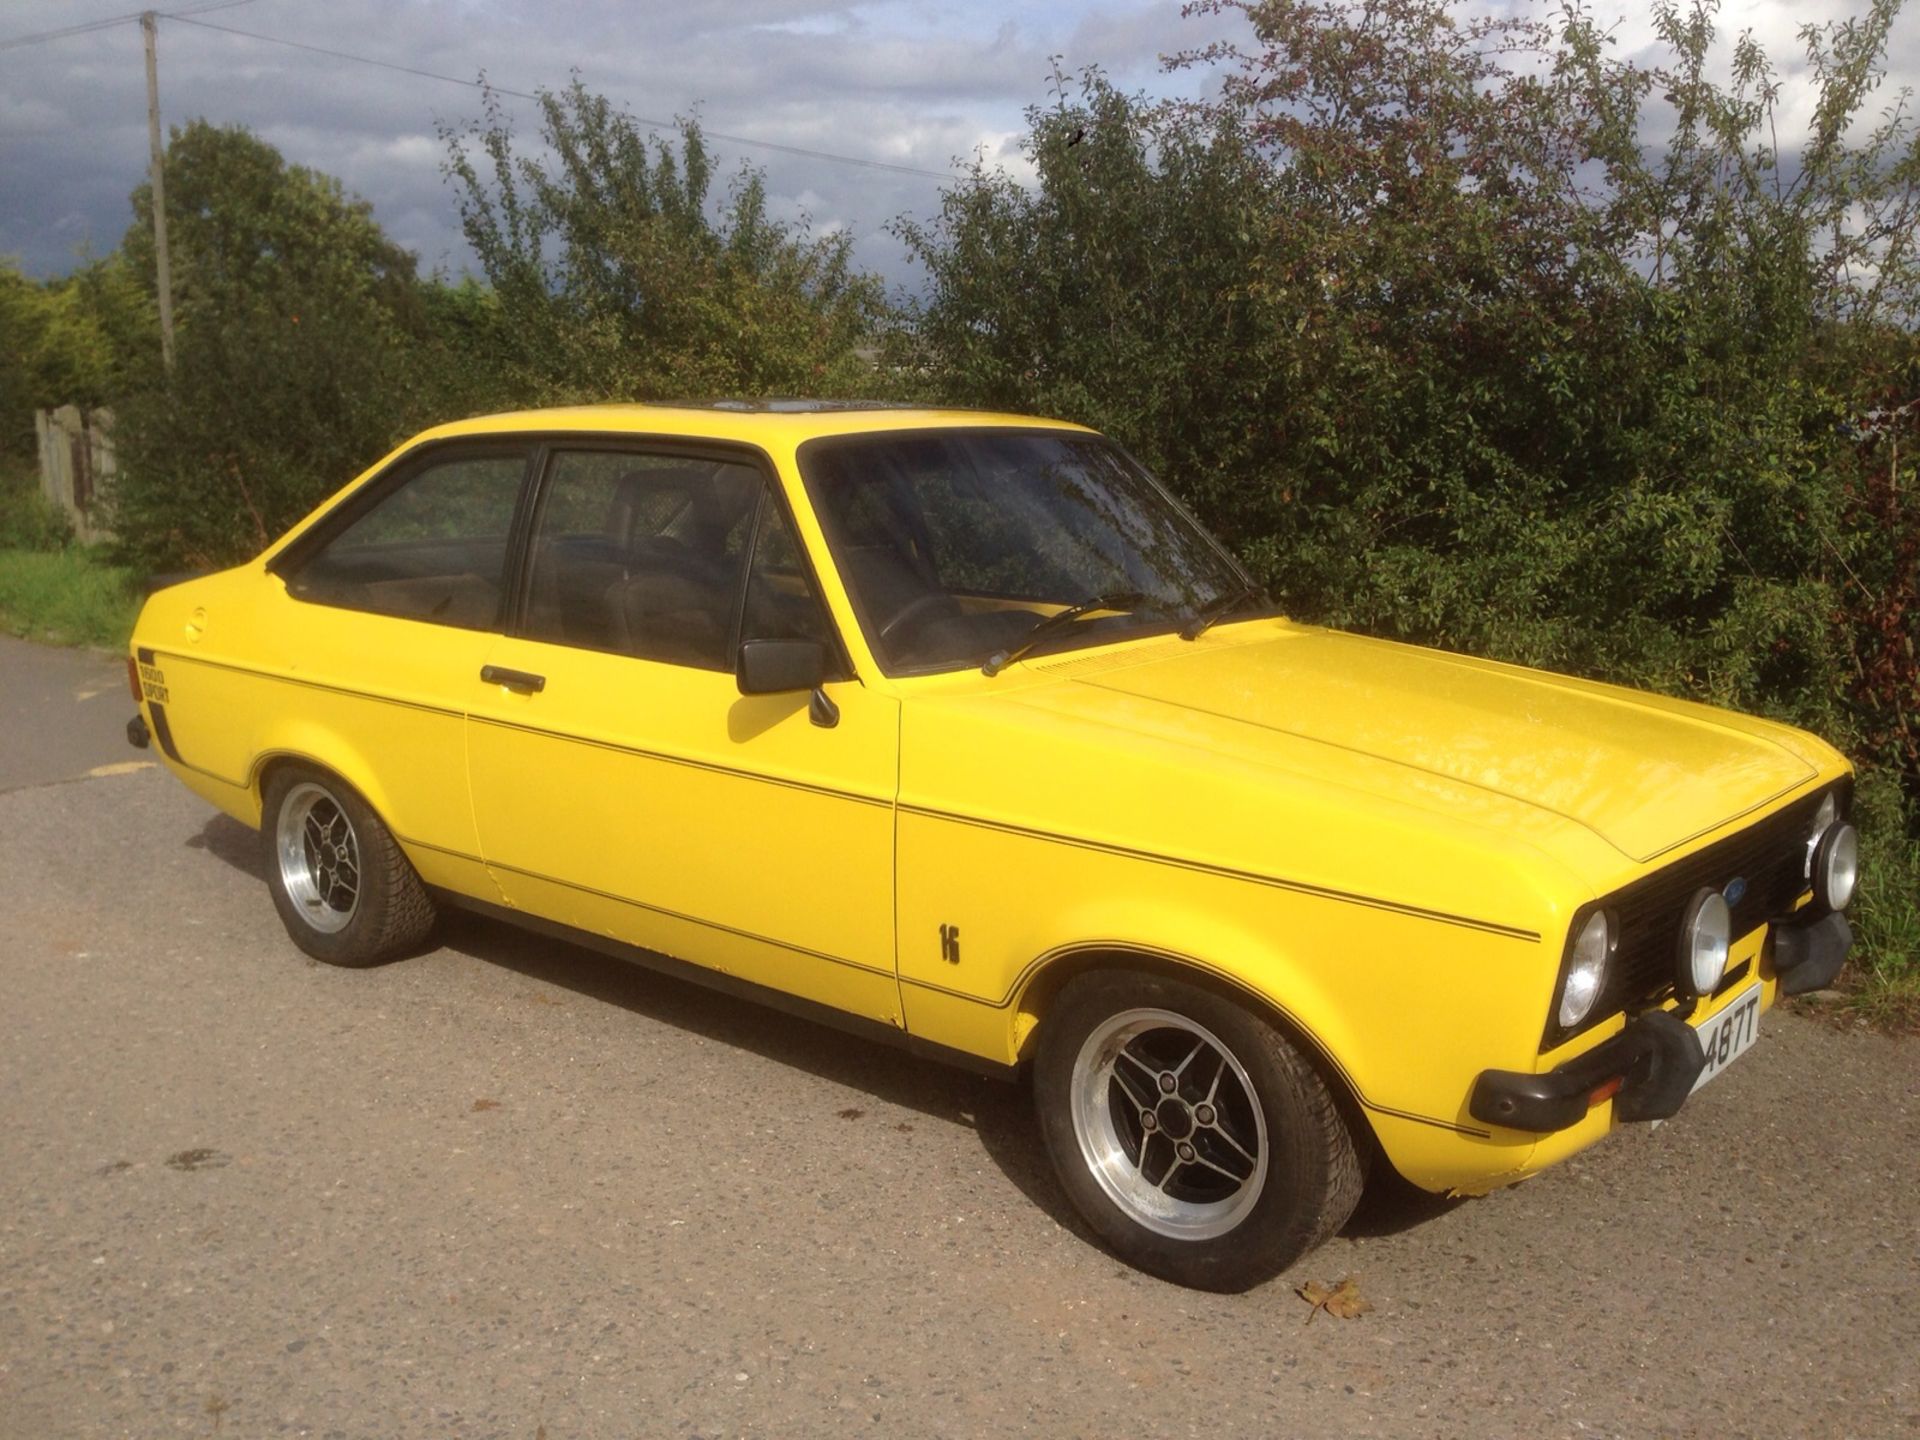 1979/T Ford Escort mk2 1600 Sport - in Signal yellow -  UK car  (545 miles) since rebuild - Image 6 of 54